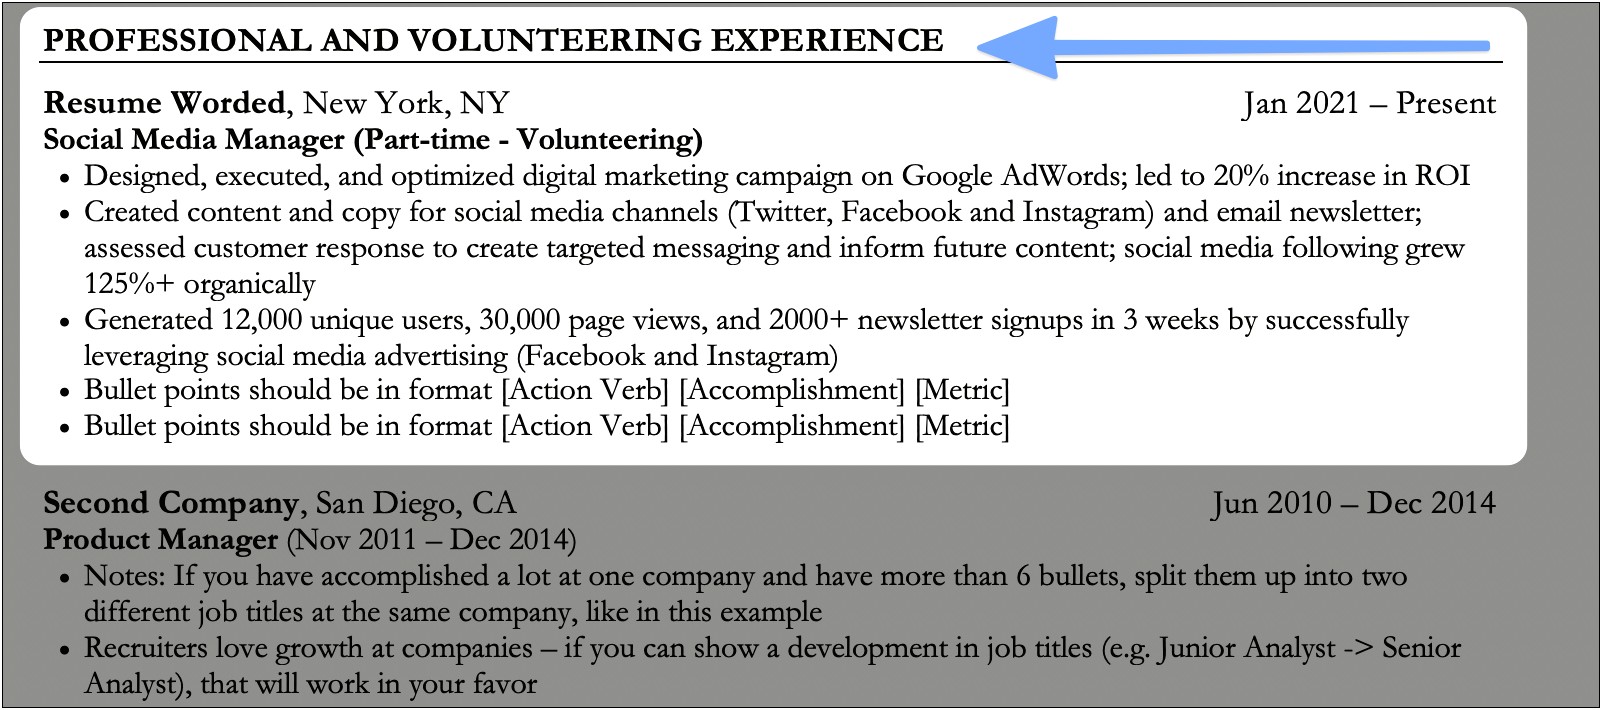 Volunteer And Other Experiences On Resume